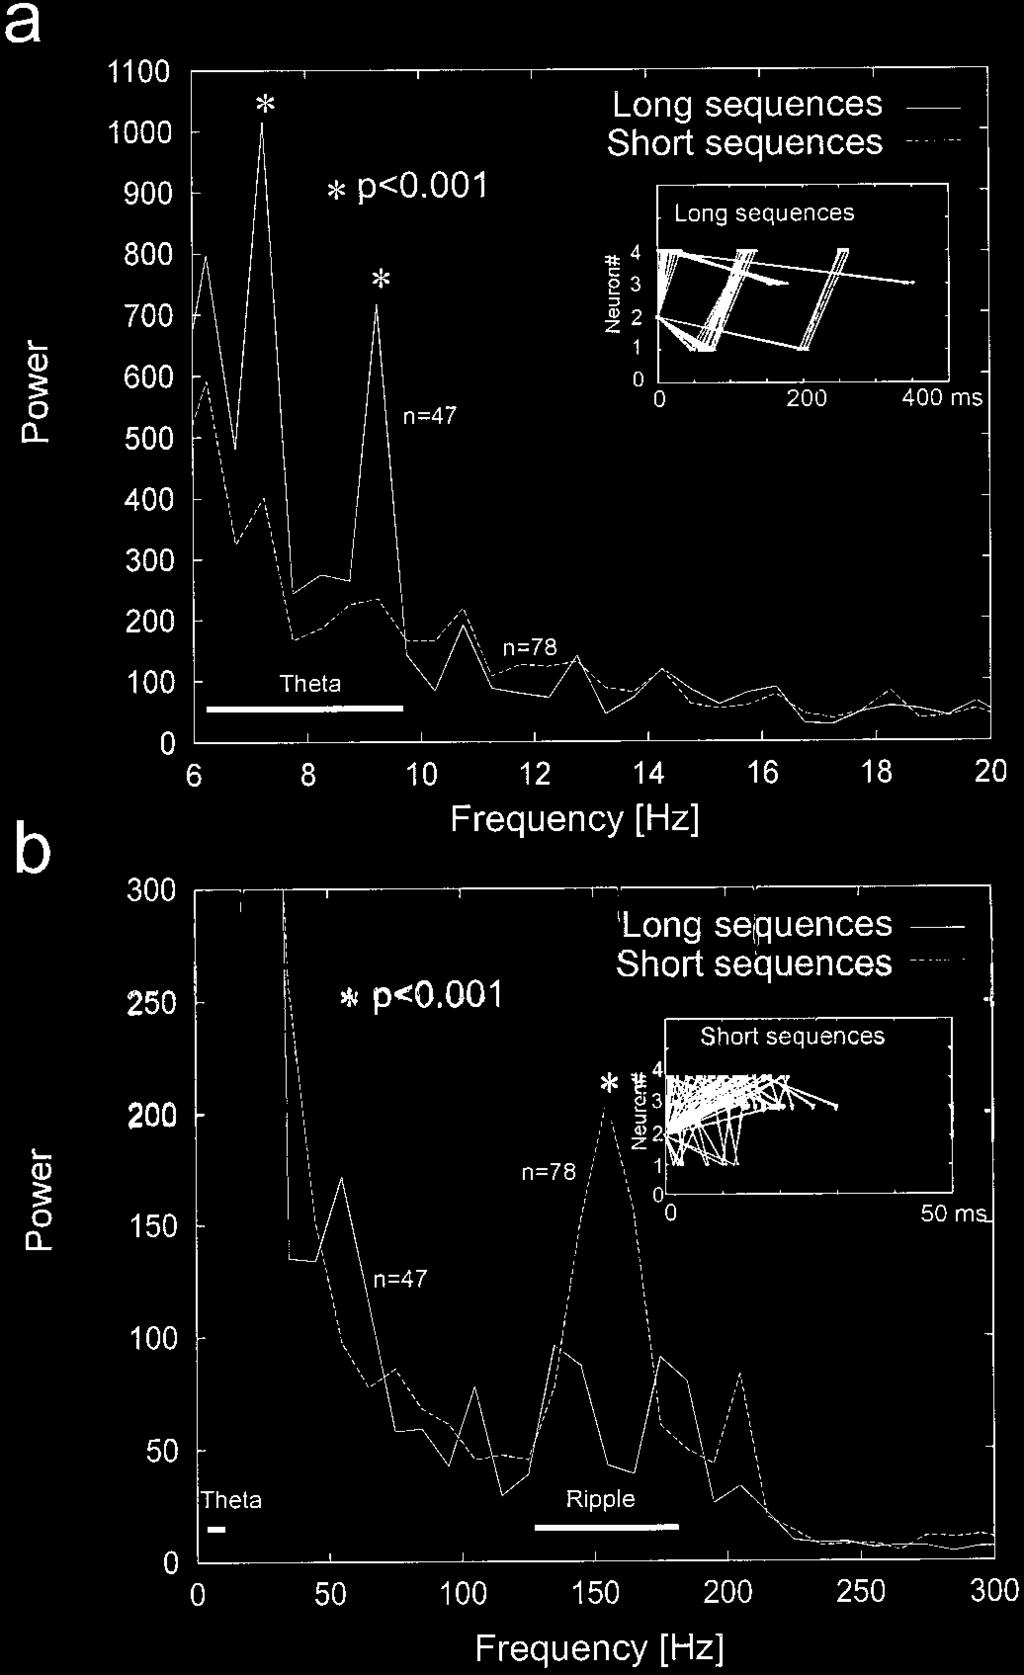 9504 J. Neurosci., November 1, 1999, 19(21):9497 9507 Nádasdy et al. Spike Sequences in the Hippocampus in vivo Figure 8. Spike sequences during sleep are influenced by previous wheelrunning behavior.